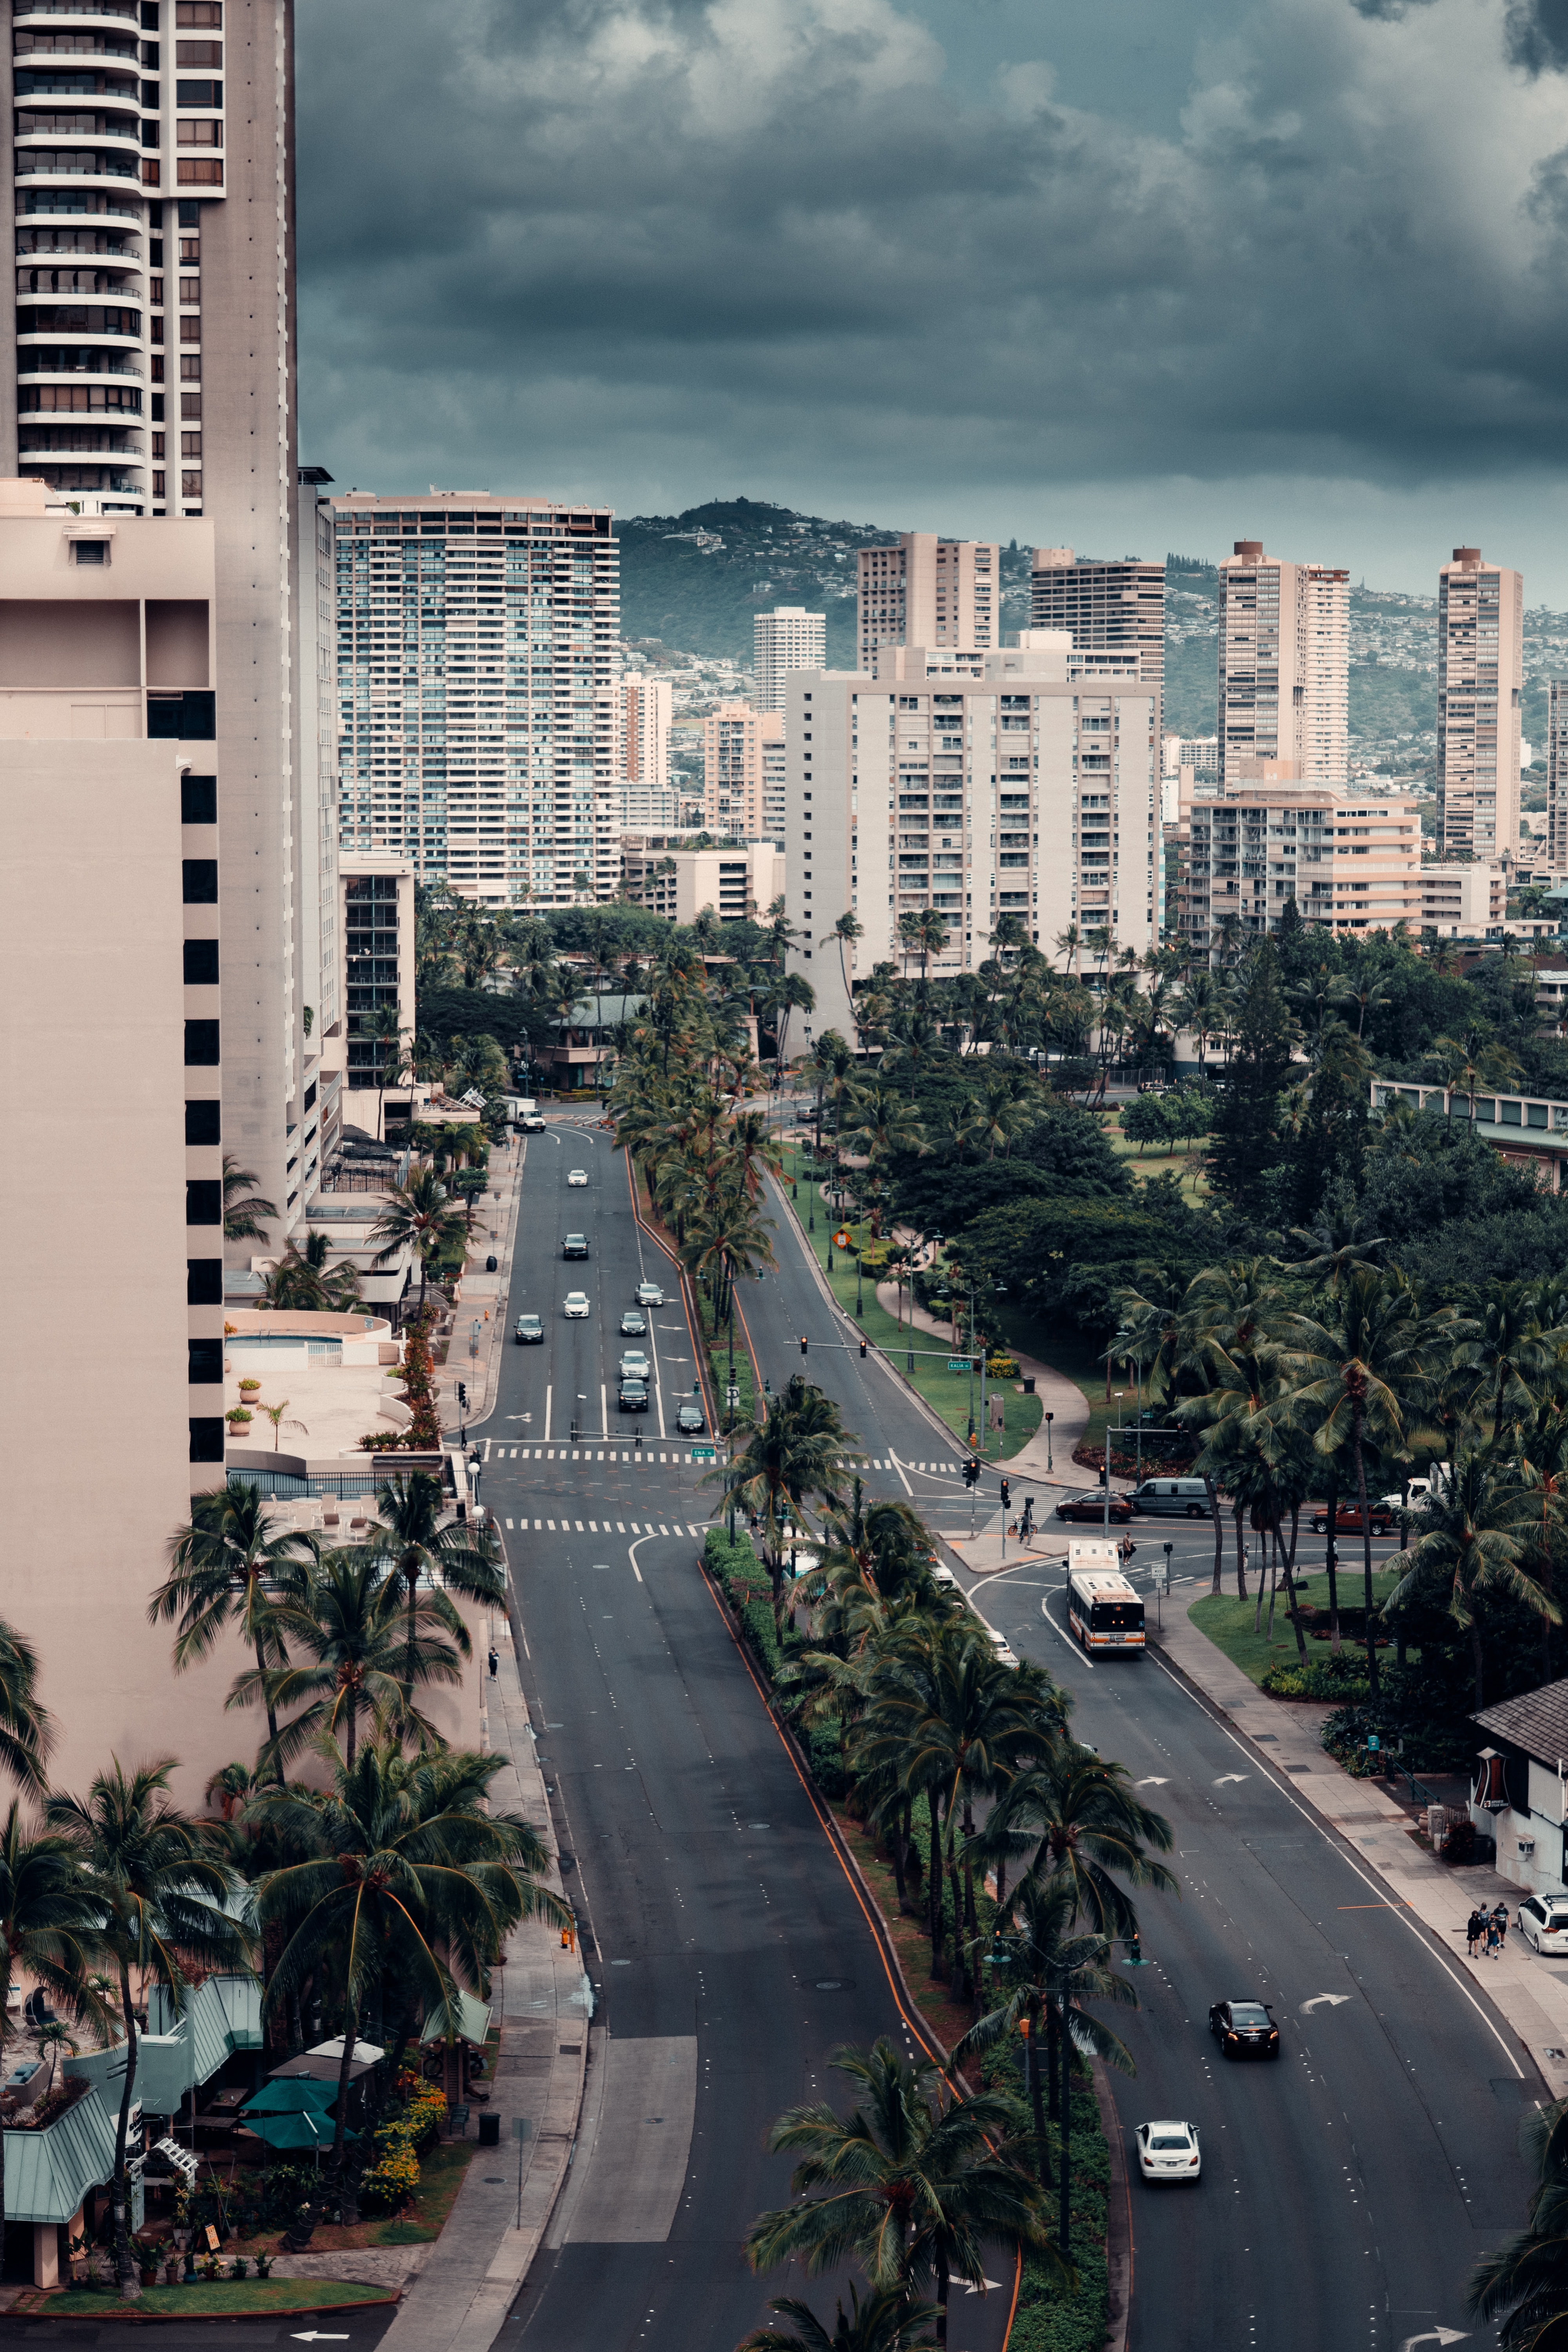 Windows Backgrounds cities, palms, city, building, view from above, road